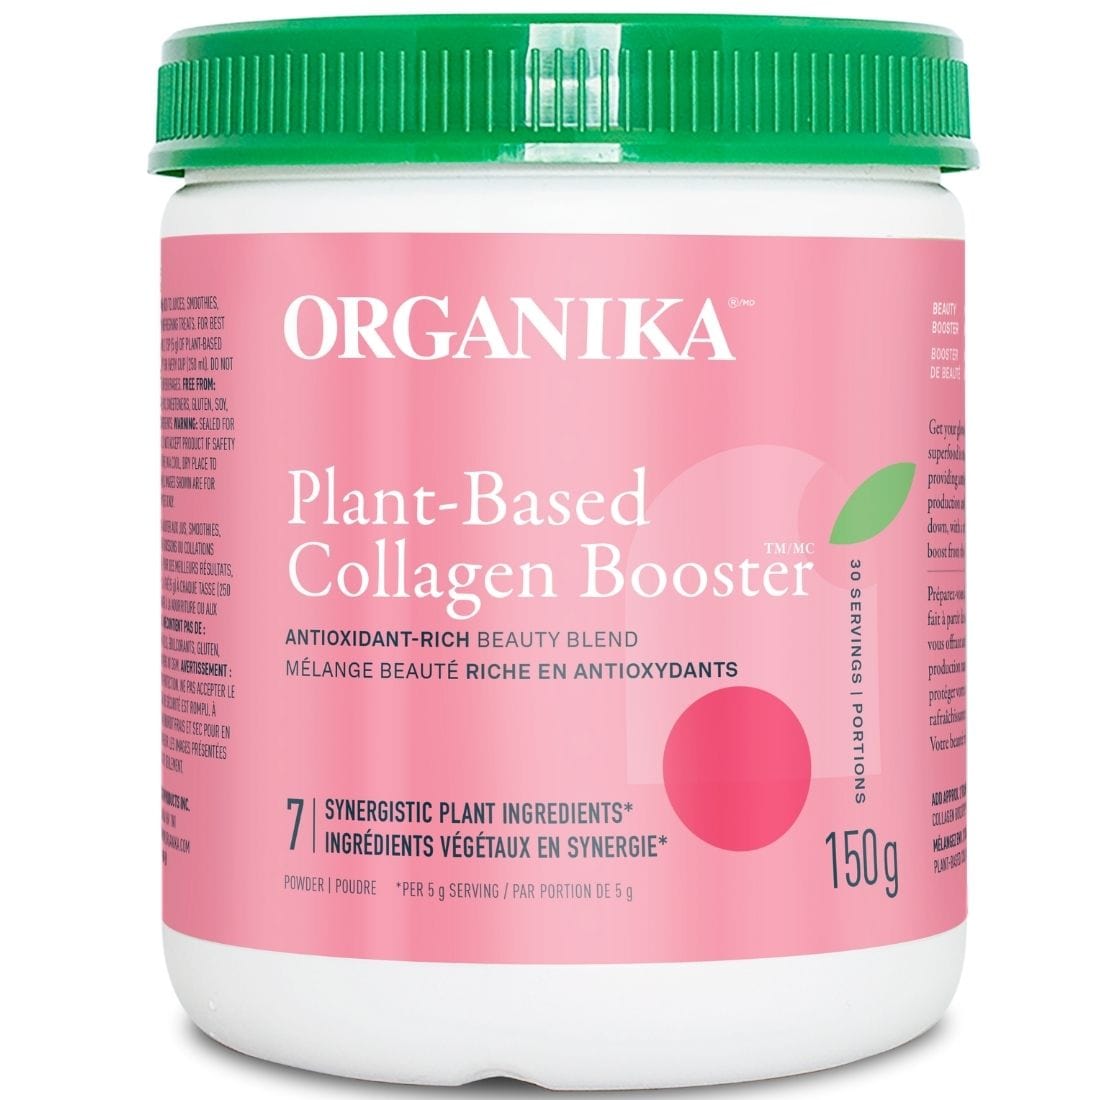 Organika Plant Based Collagen Booster (All Natural), 150g